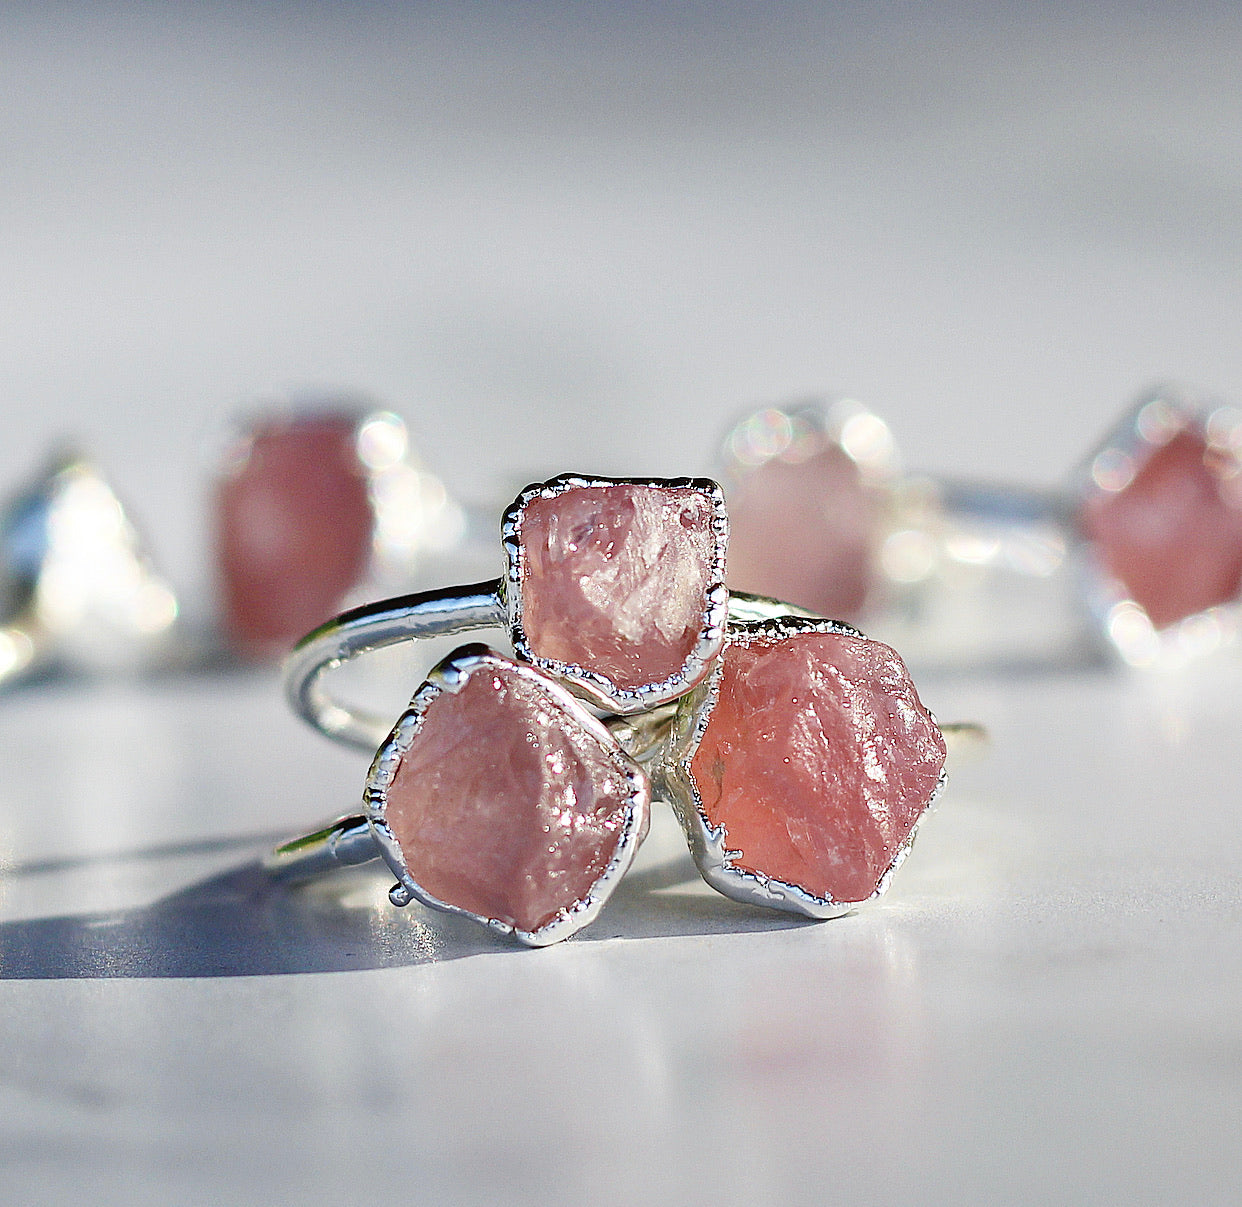 Raw Rose Quartz Ring in Sterling Silver, love stone ring, raw gem ring, rose quartz nugget, uncut rose quartz, birthstone ring, Taurus birthstone, rose quartz ring, sterling silver raw, buddha blossom, blossom jewels